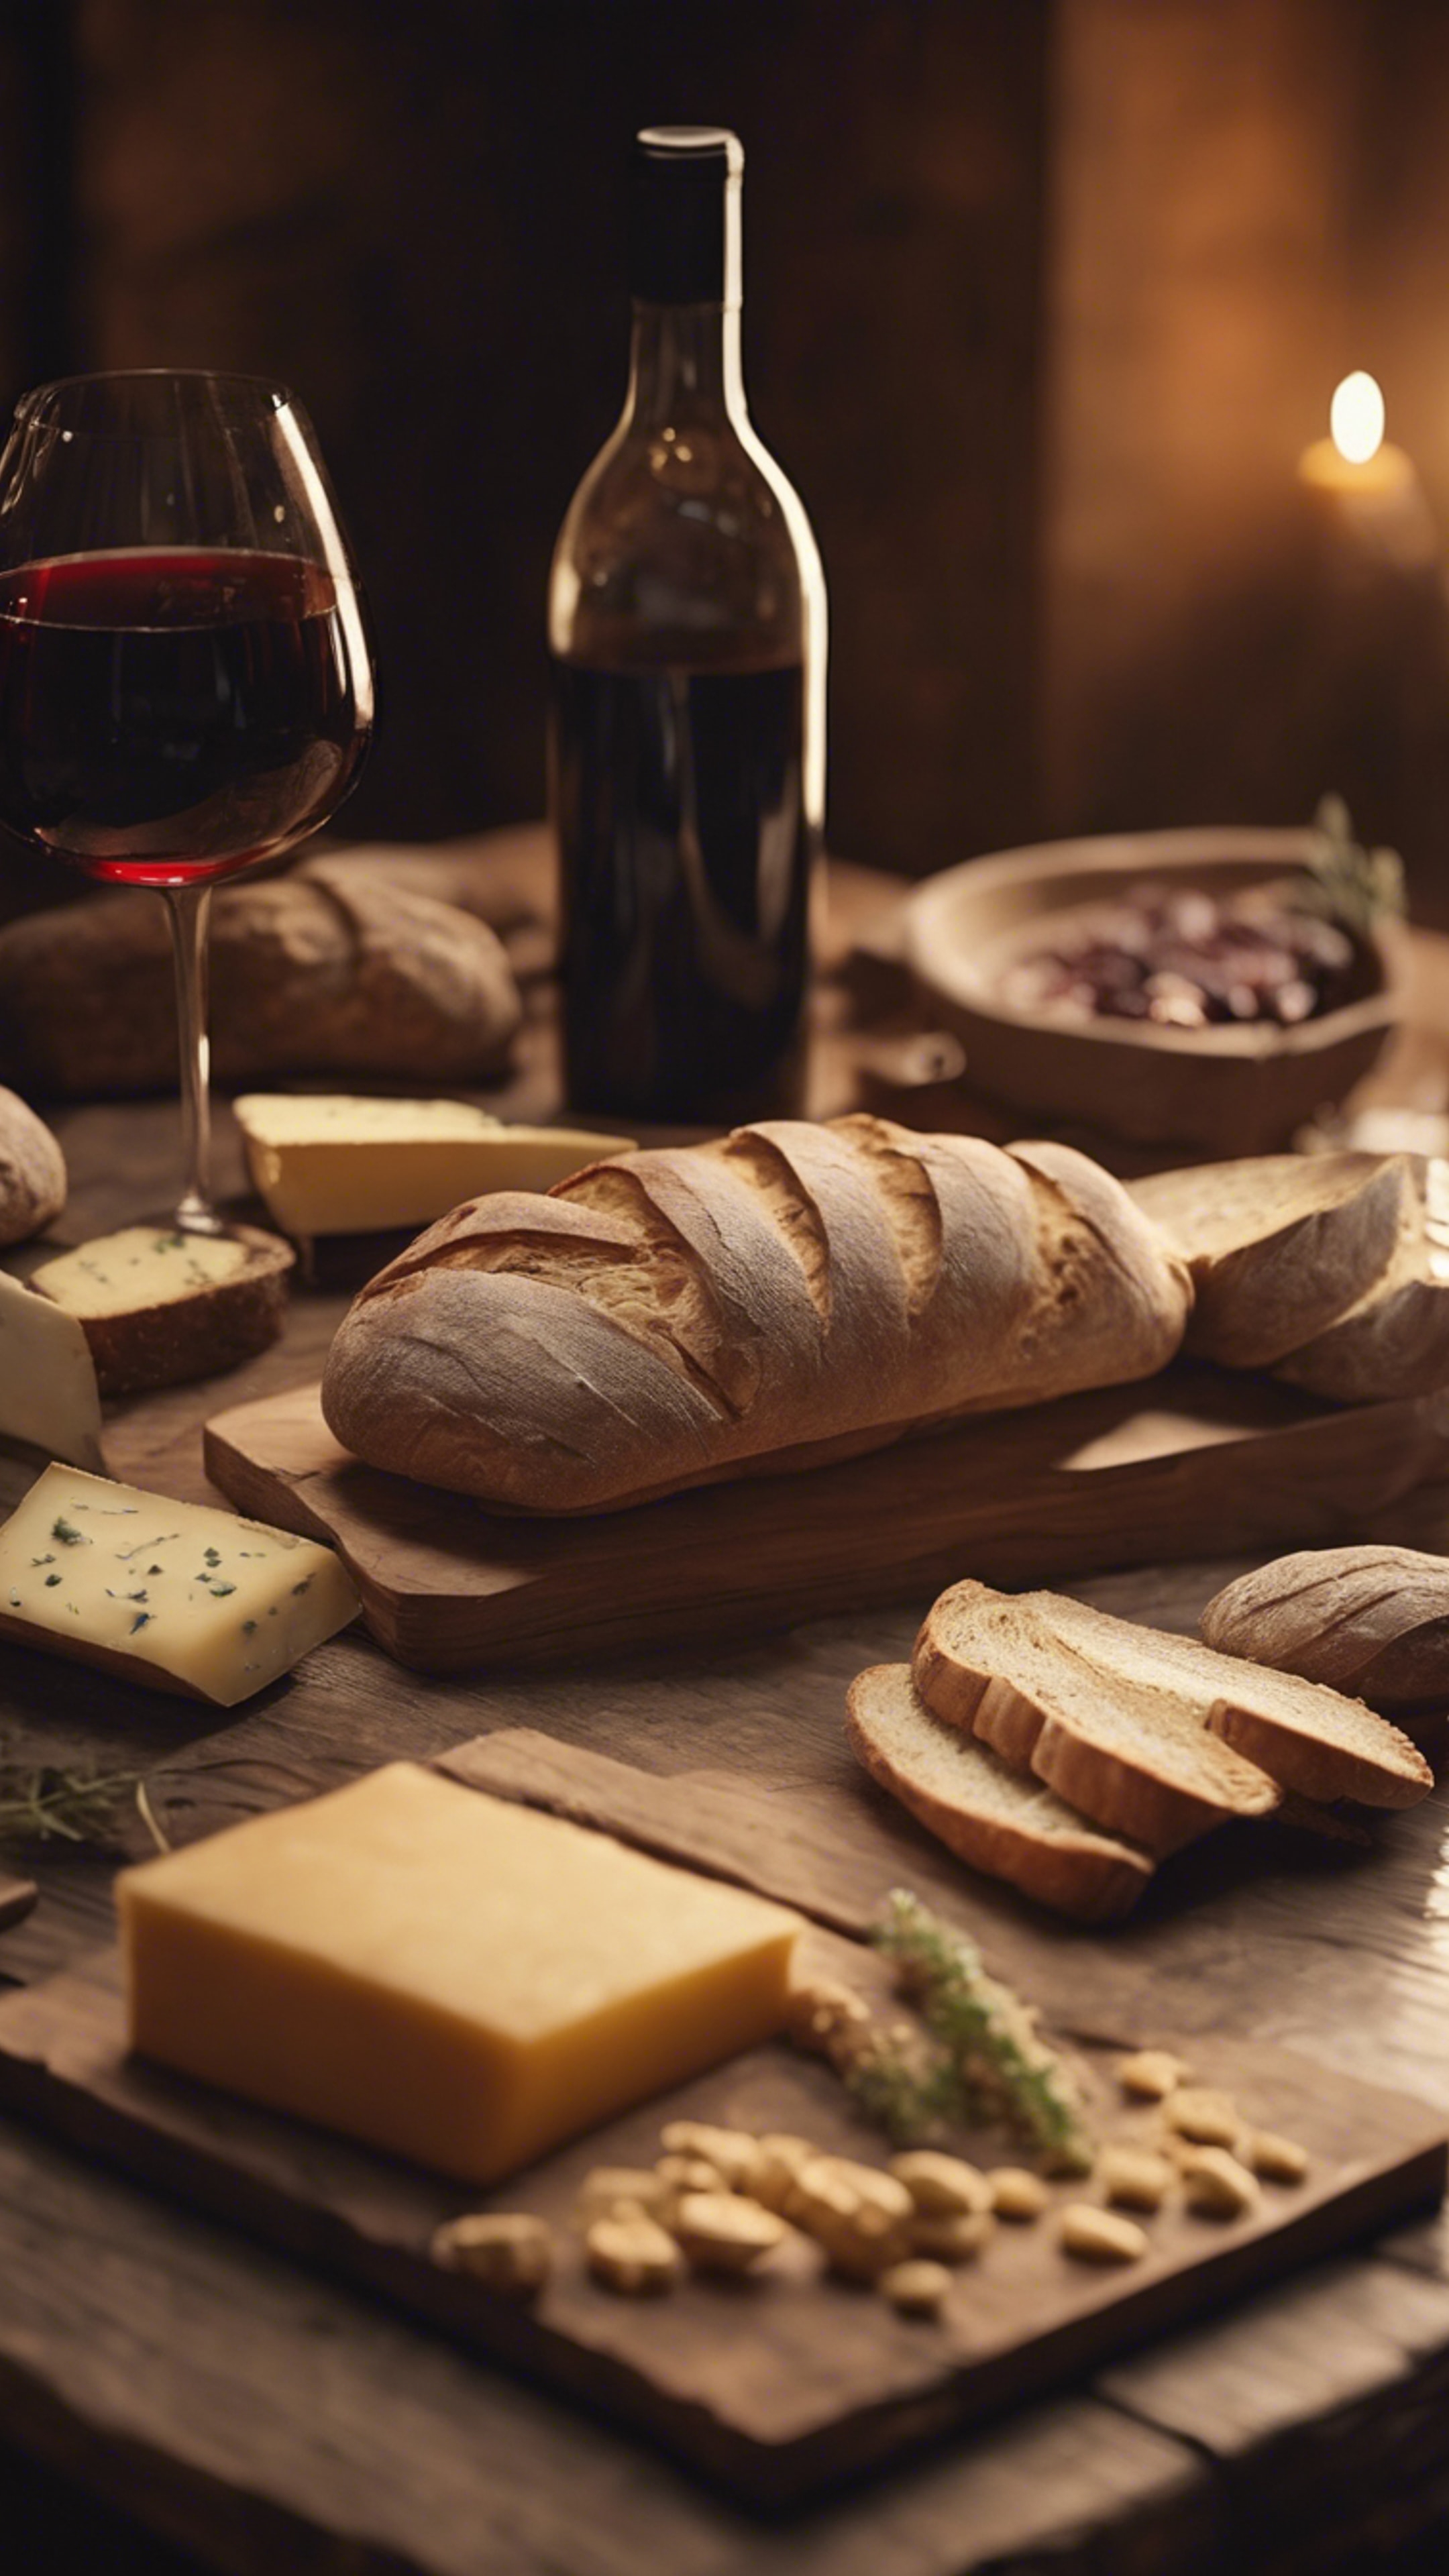 Detailed close-up of a rustic French country-style wooden table set with fresh bread, wine, and cheese under warm interior lighting. Tapeta[6a74bb7d88b74d998281]